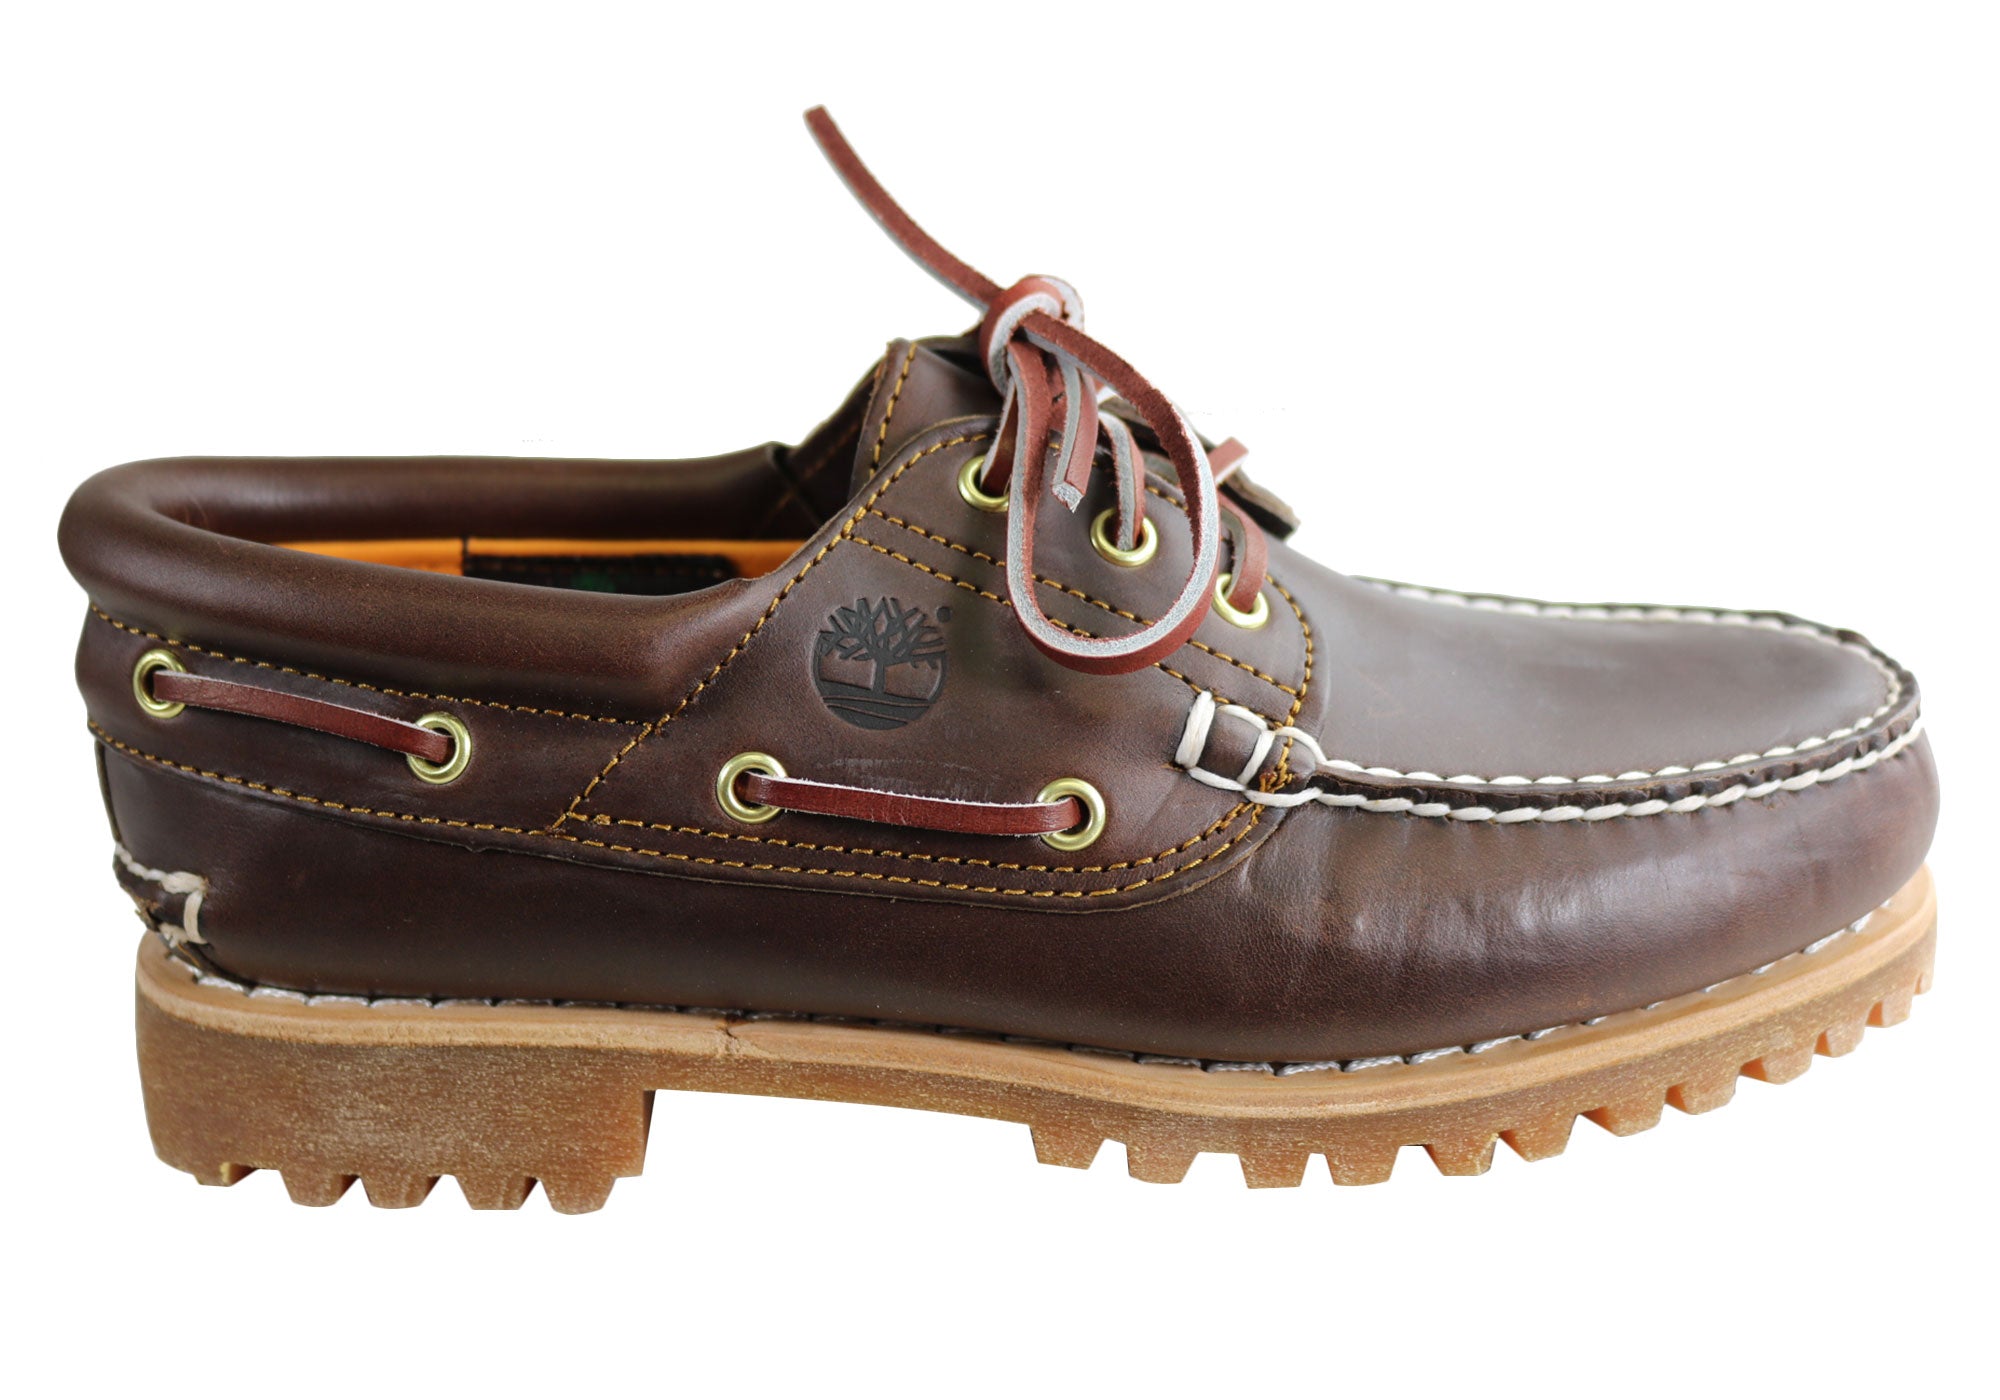 timberland slip on boat shoes